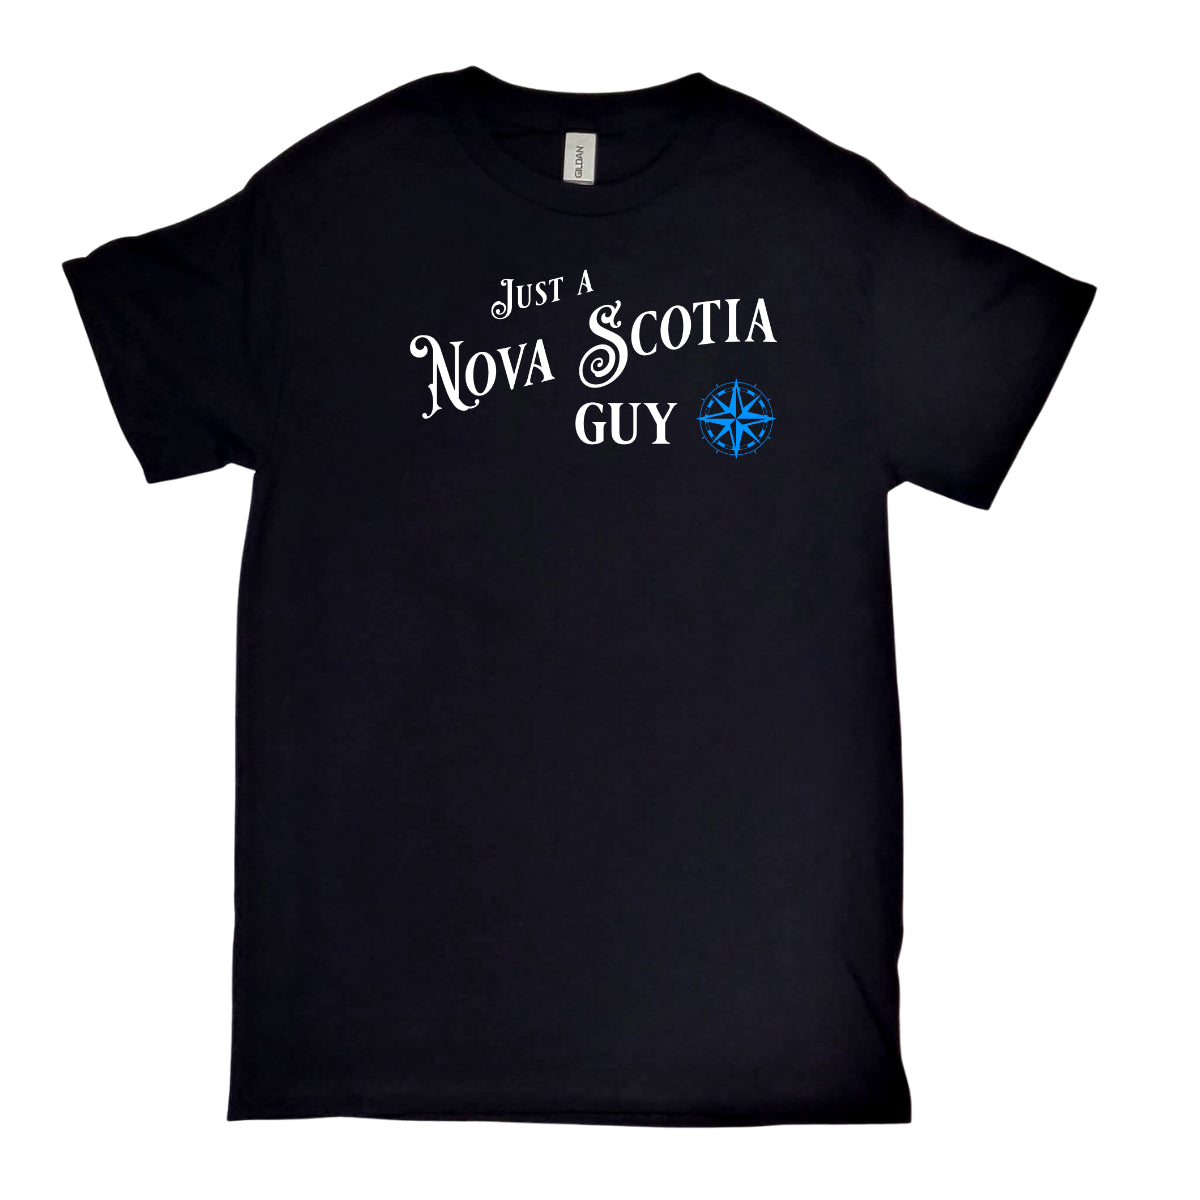 Just a NS Guy Tee